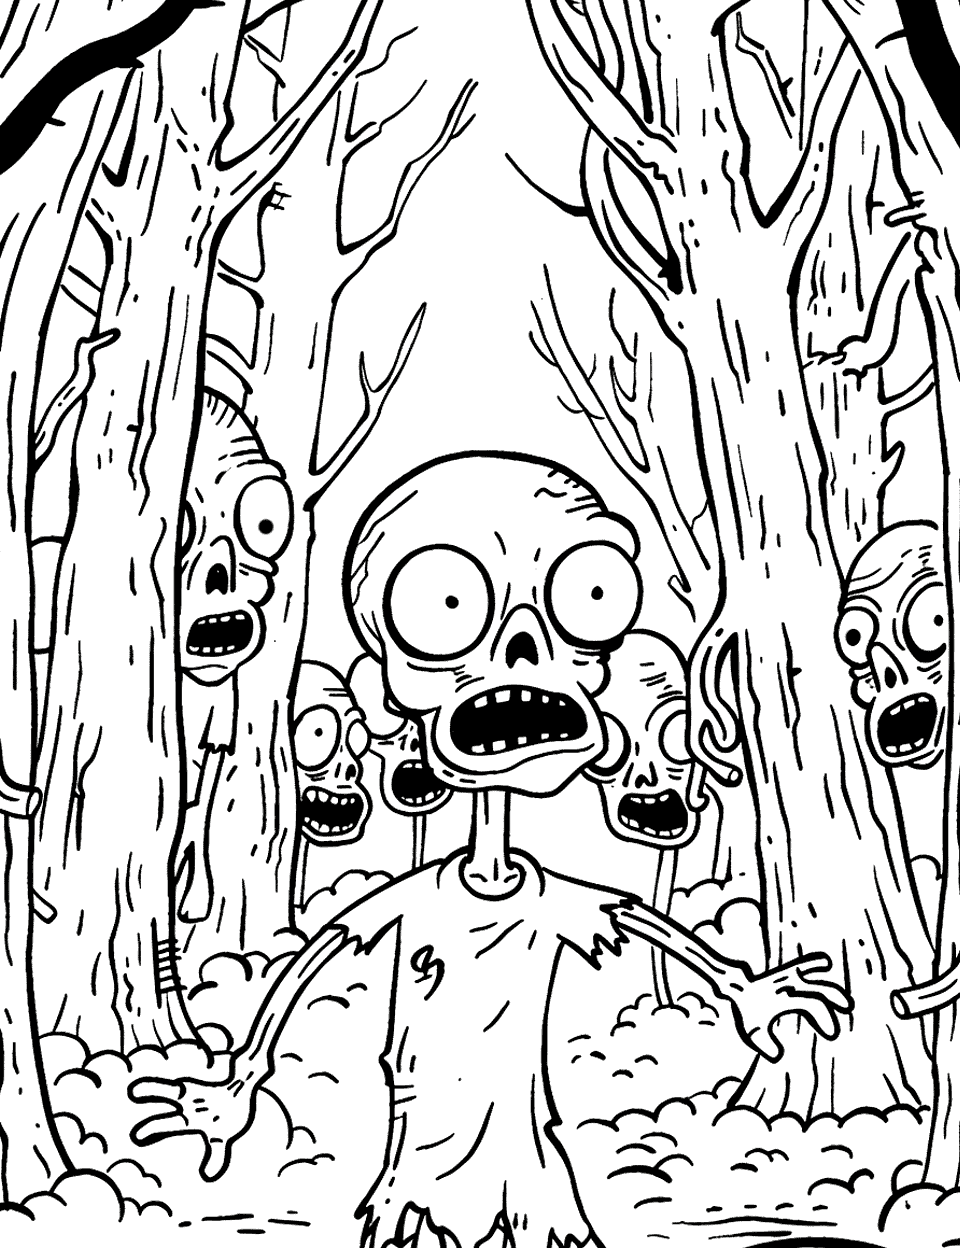 Forest of the Zombies Zombie Coloring Page - Zombies lurking among the trees in a dense forest.